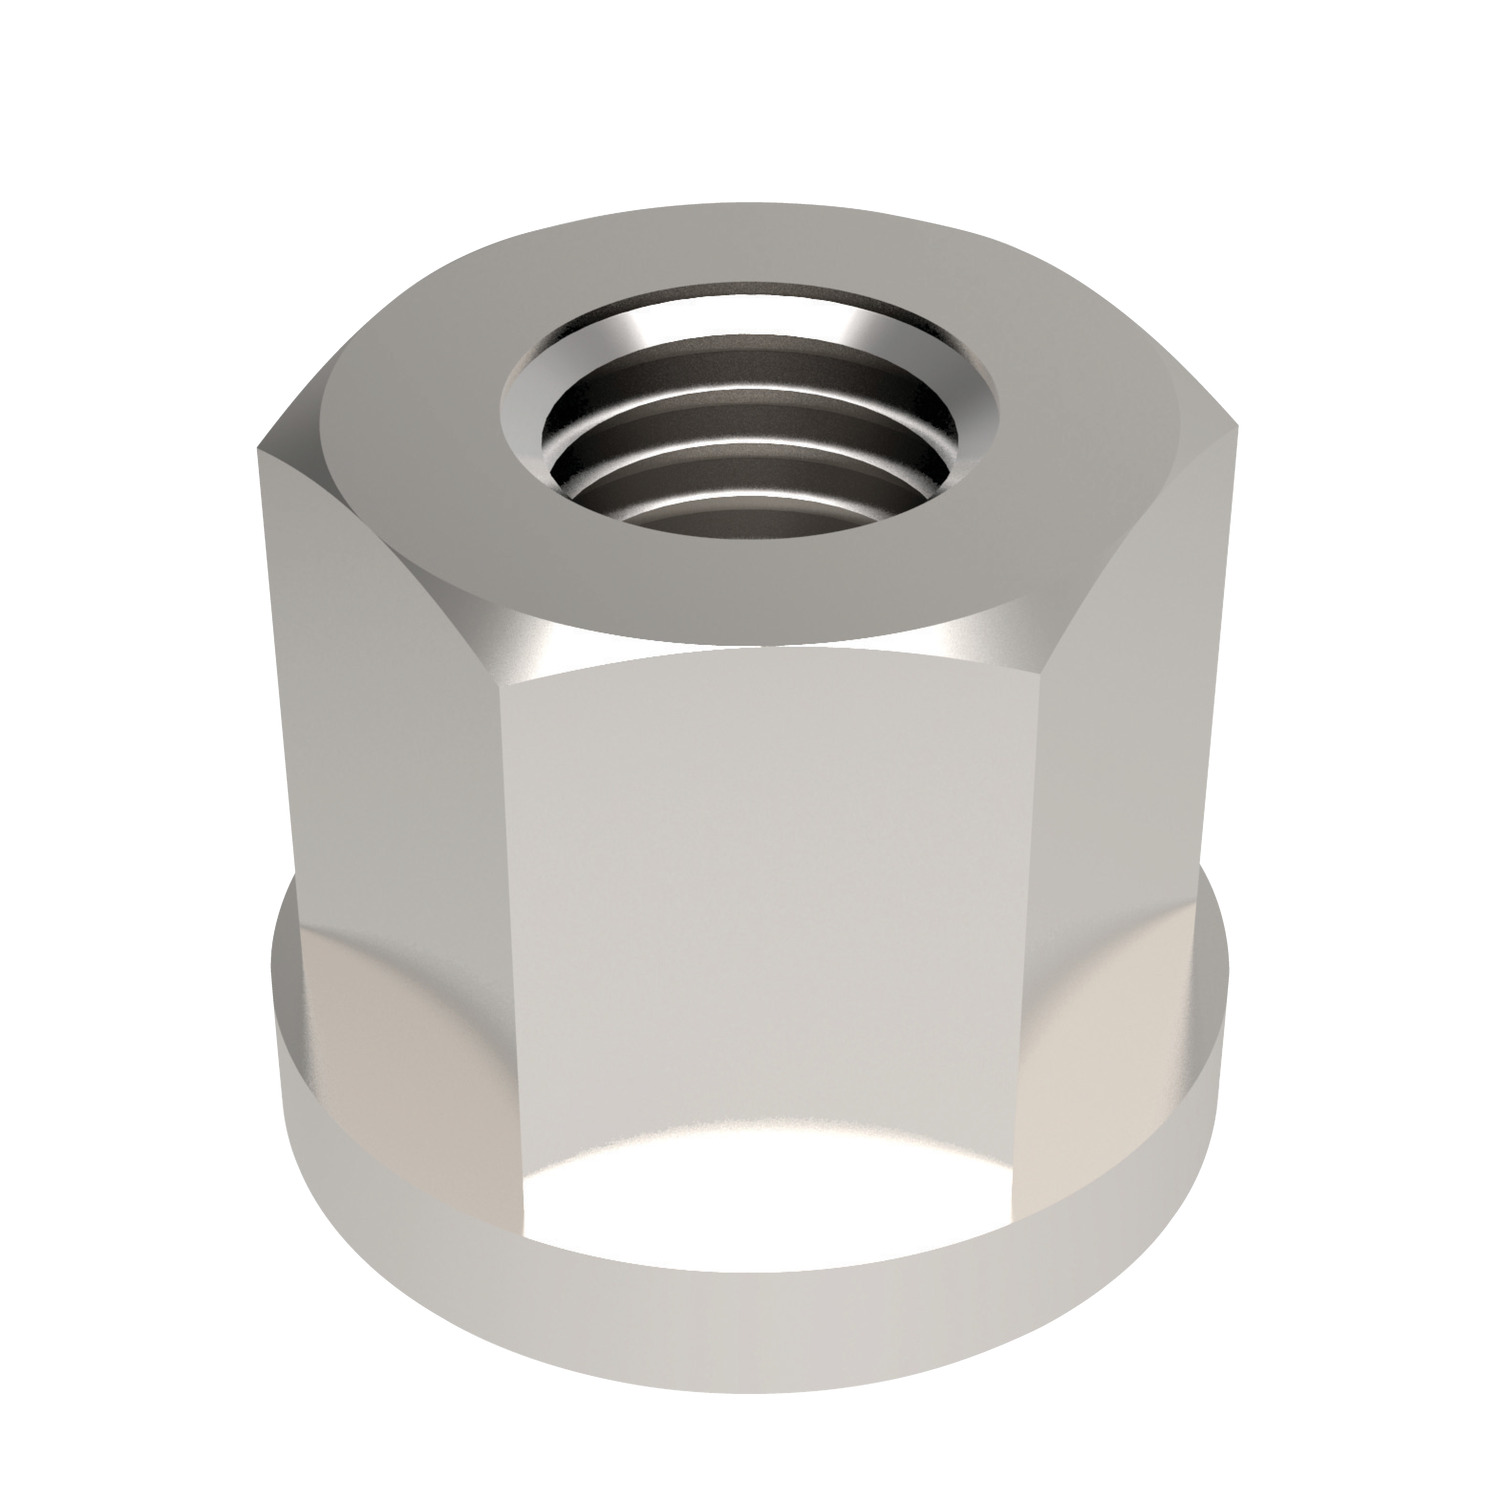 Fixture & Collar Nuts - Stainless Steel